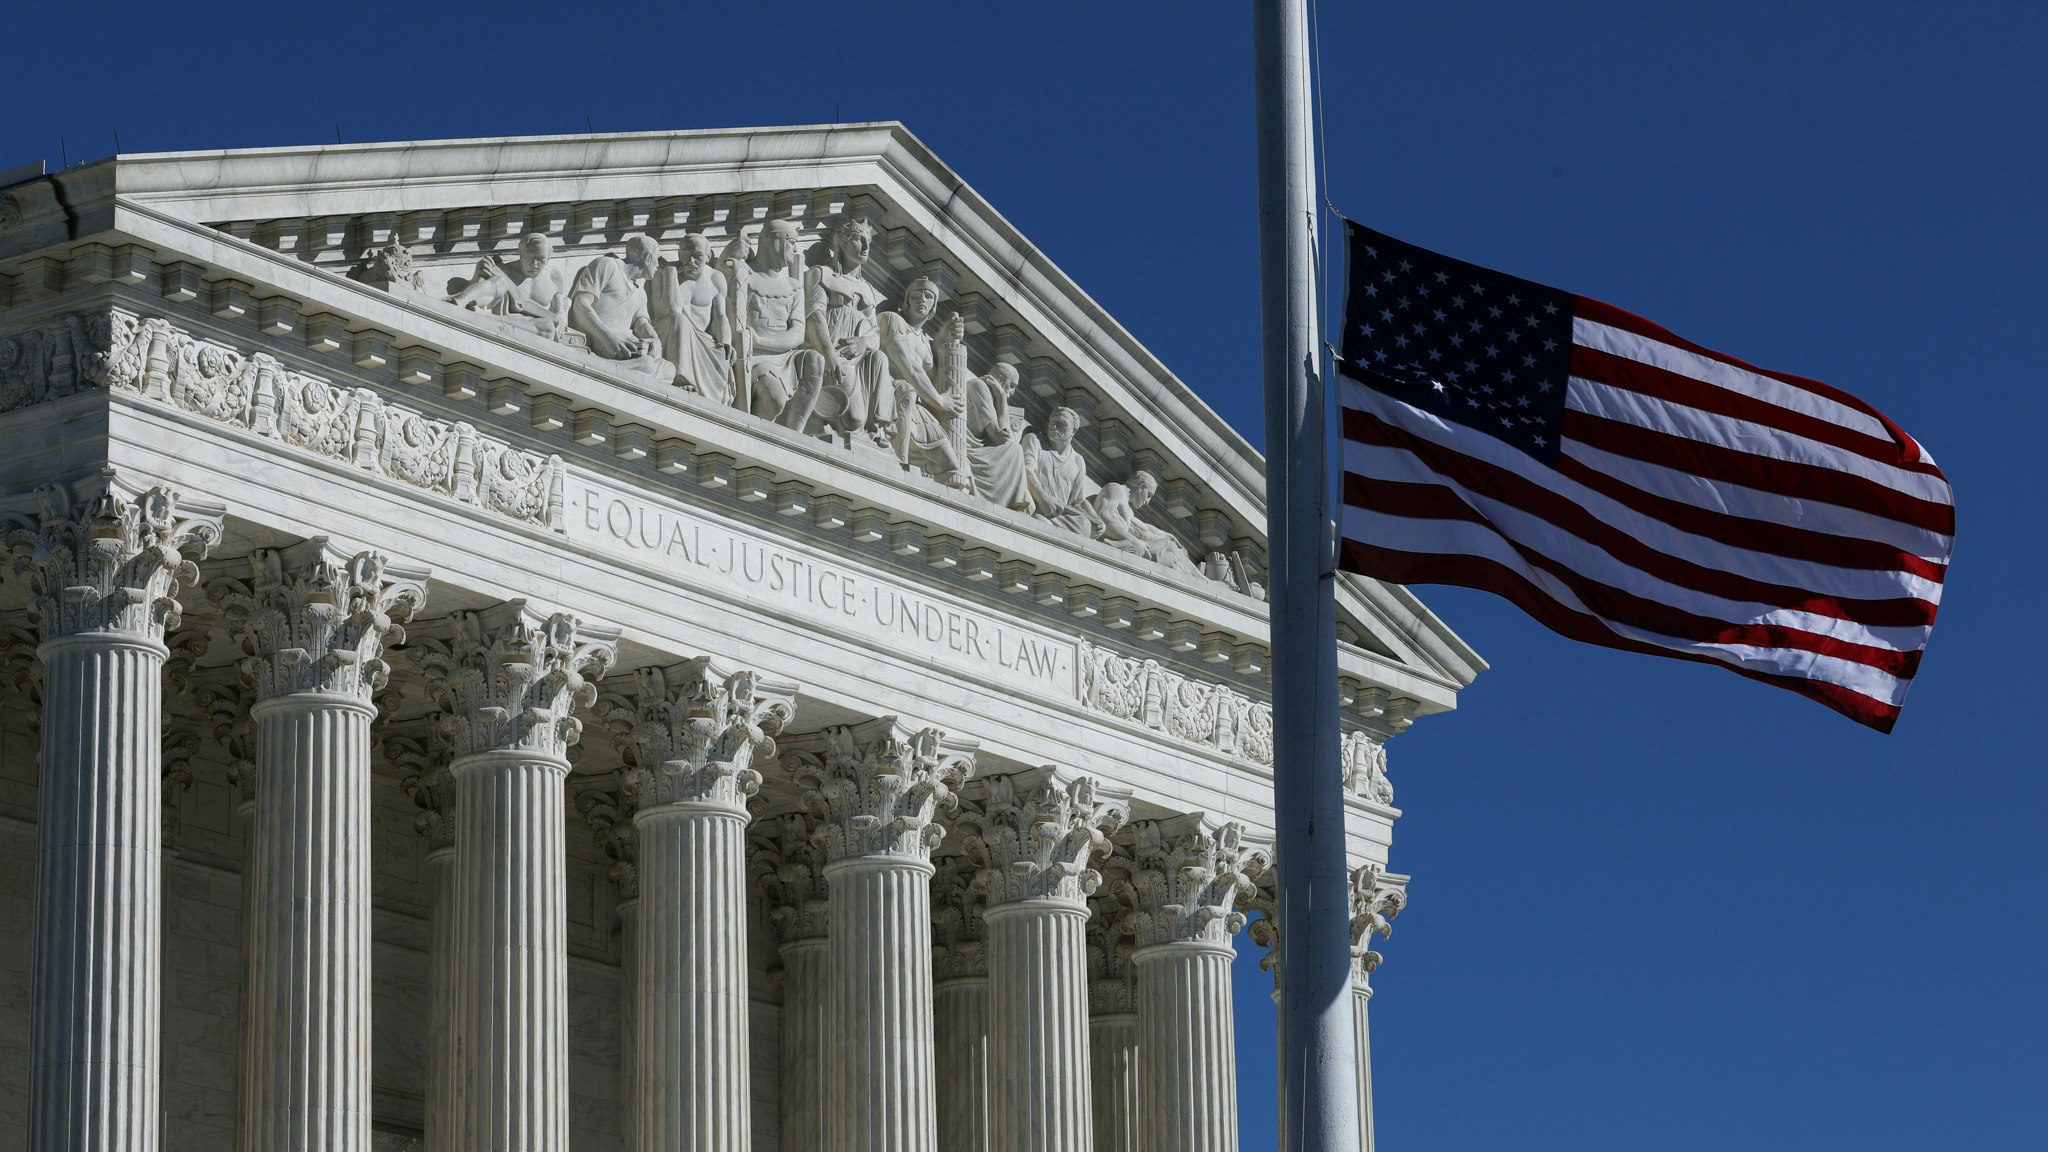 A U.S. flag is lowered to half-mast outside of the U.S. Supreme Court to mourn the death of Supreme Court Justice Ruth Bader Ginsburg in Washington, United States on September 21, 2020. (Photo by Yasin Ozturk/Anadolu Agency via Getty Images)